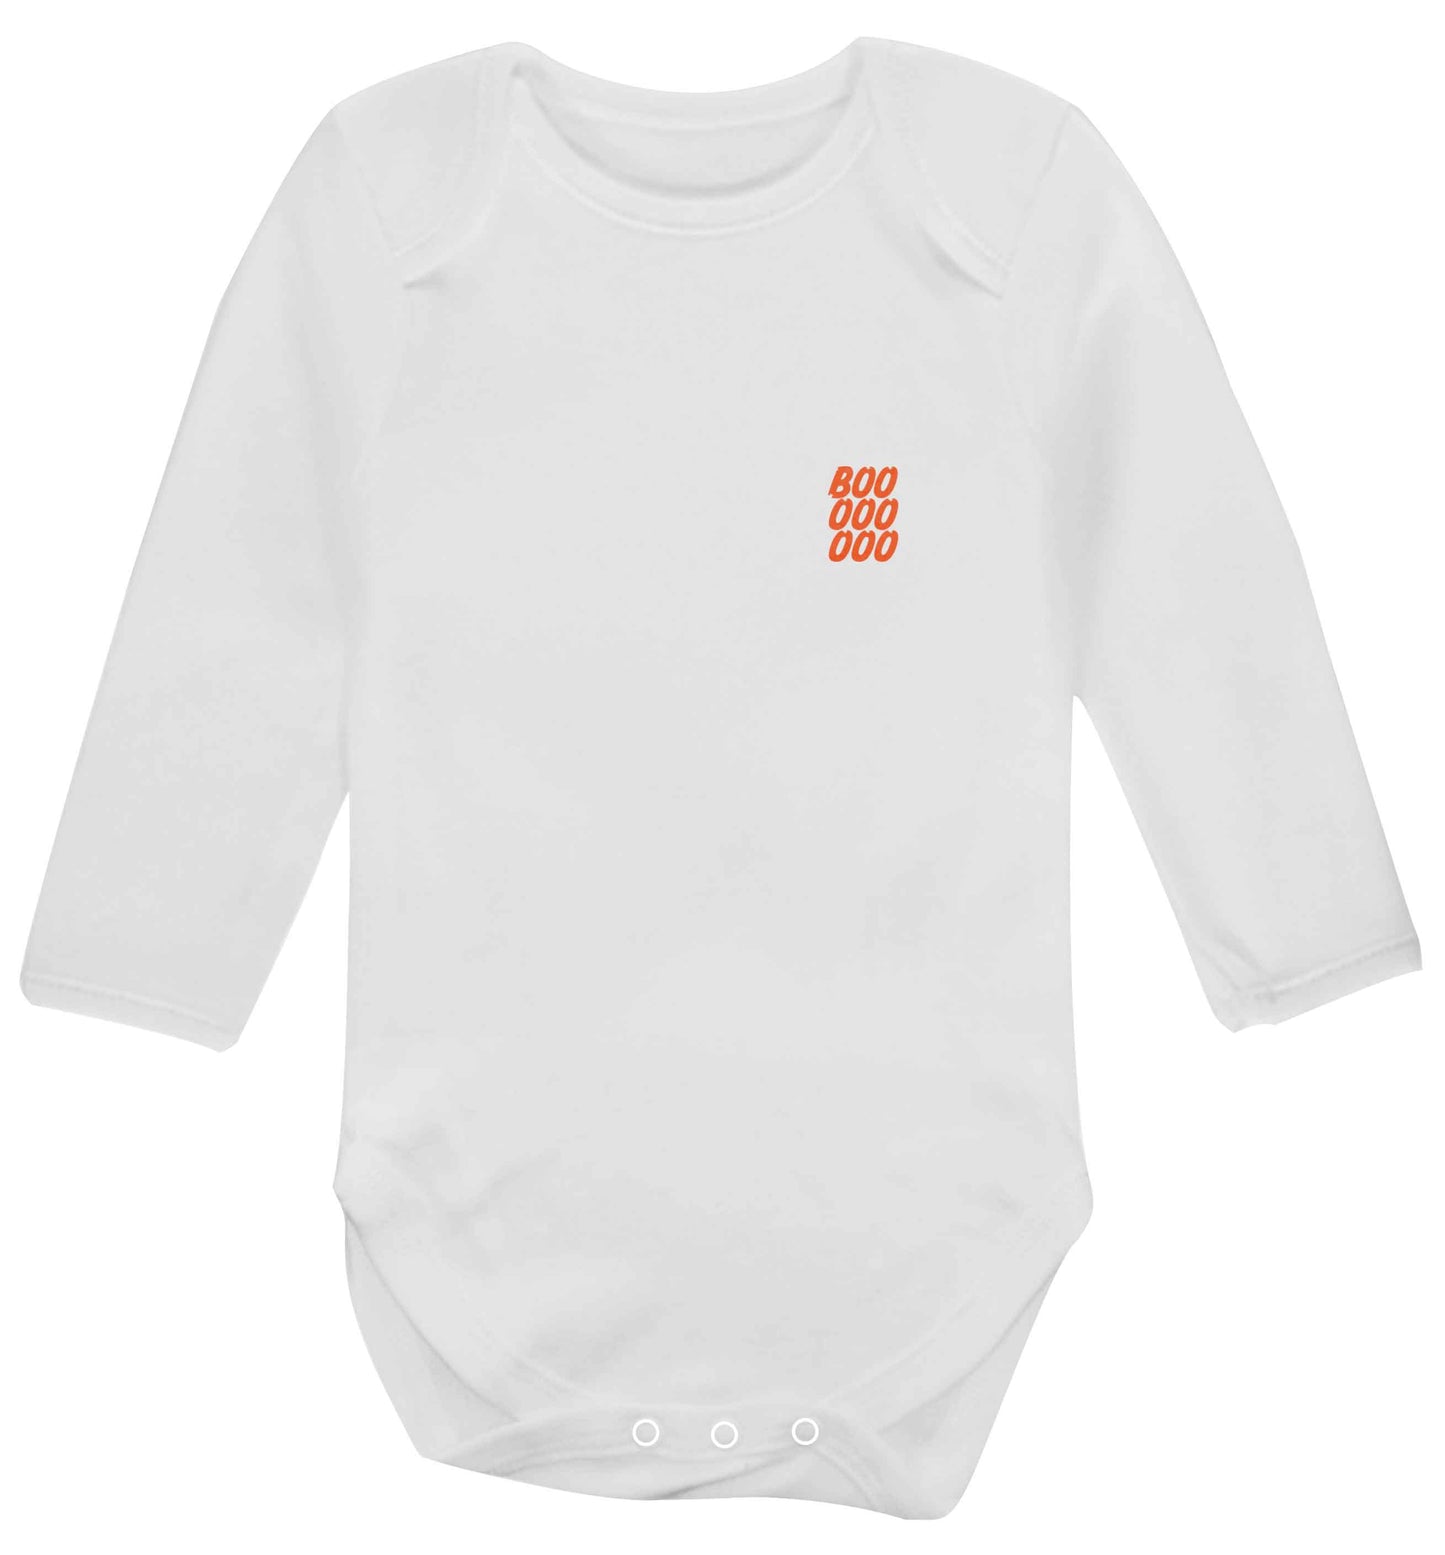 Boo pocket baby vest long sleeved white 6-12 months